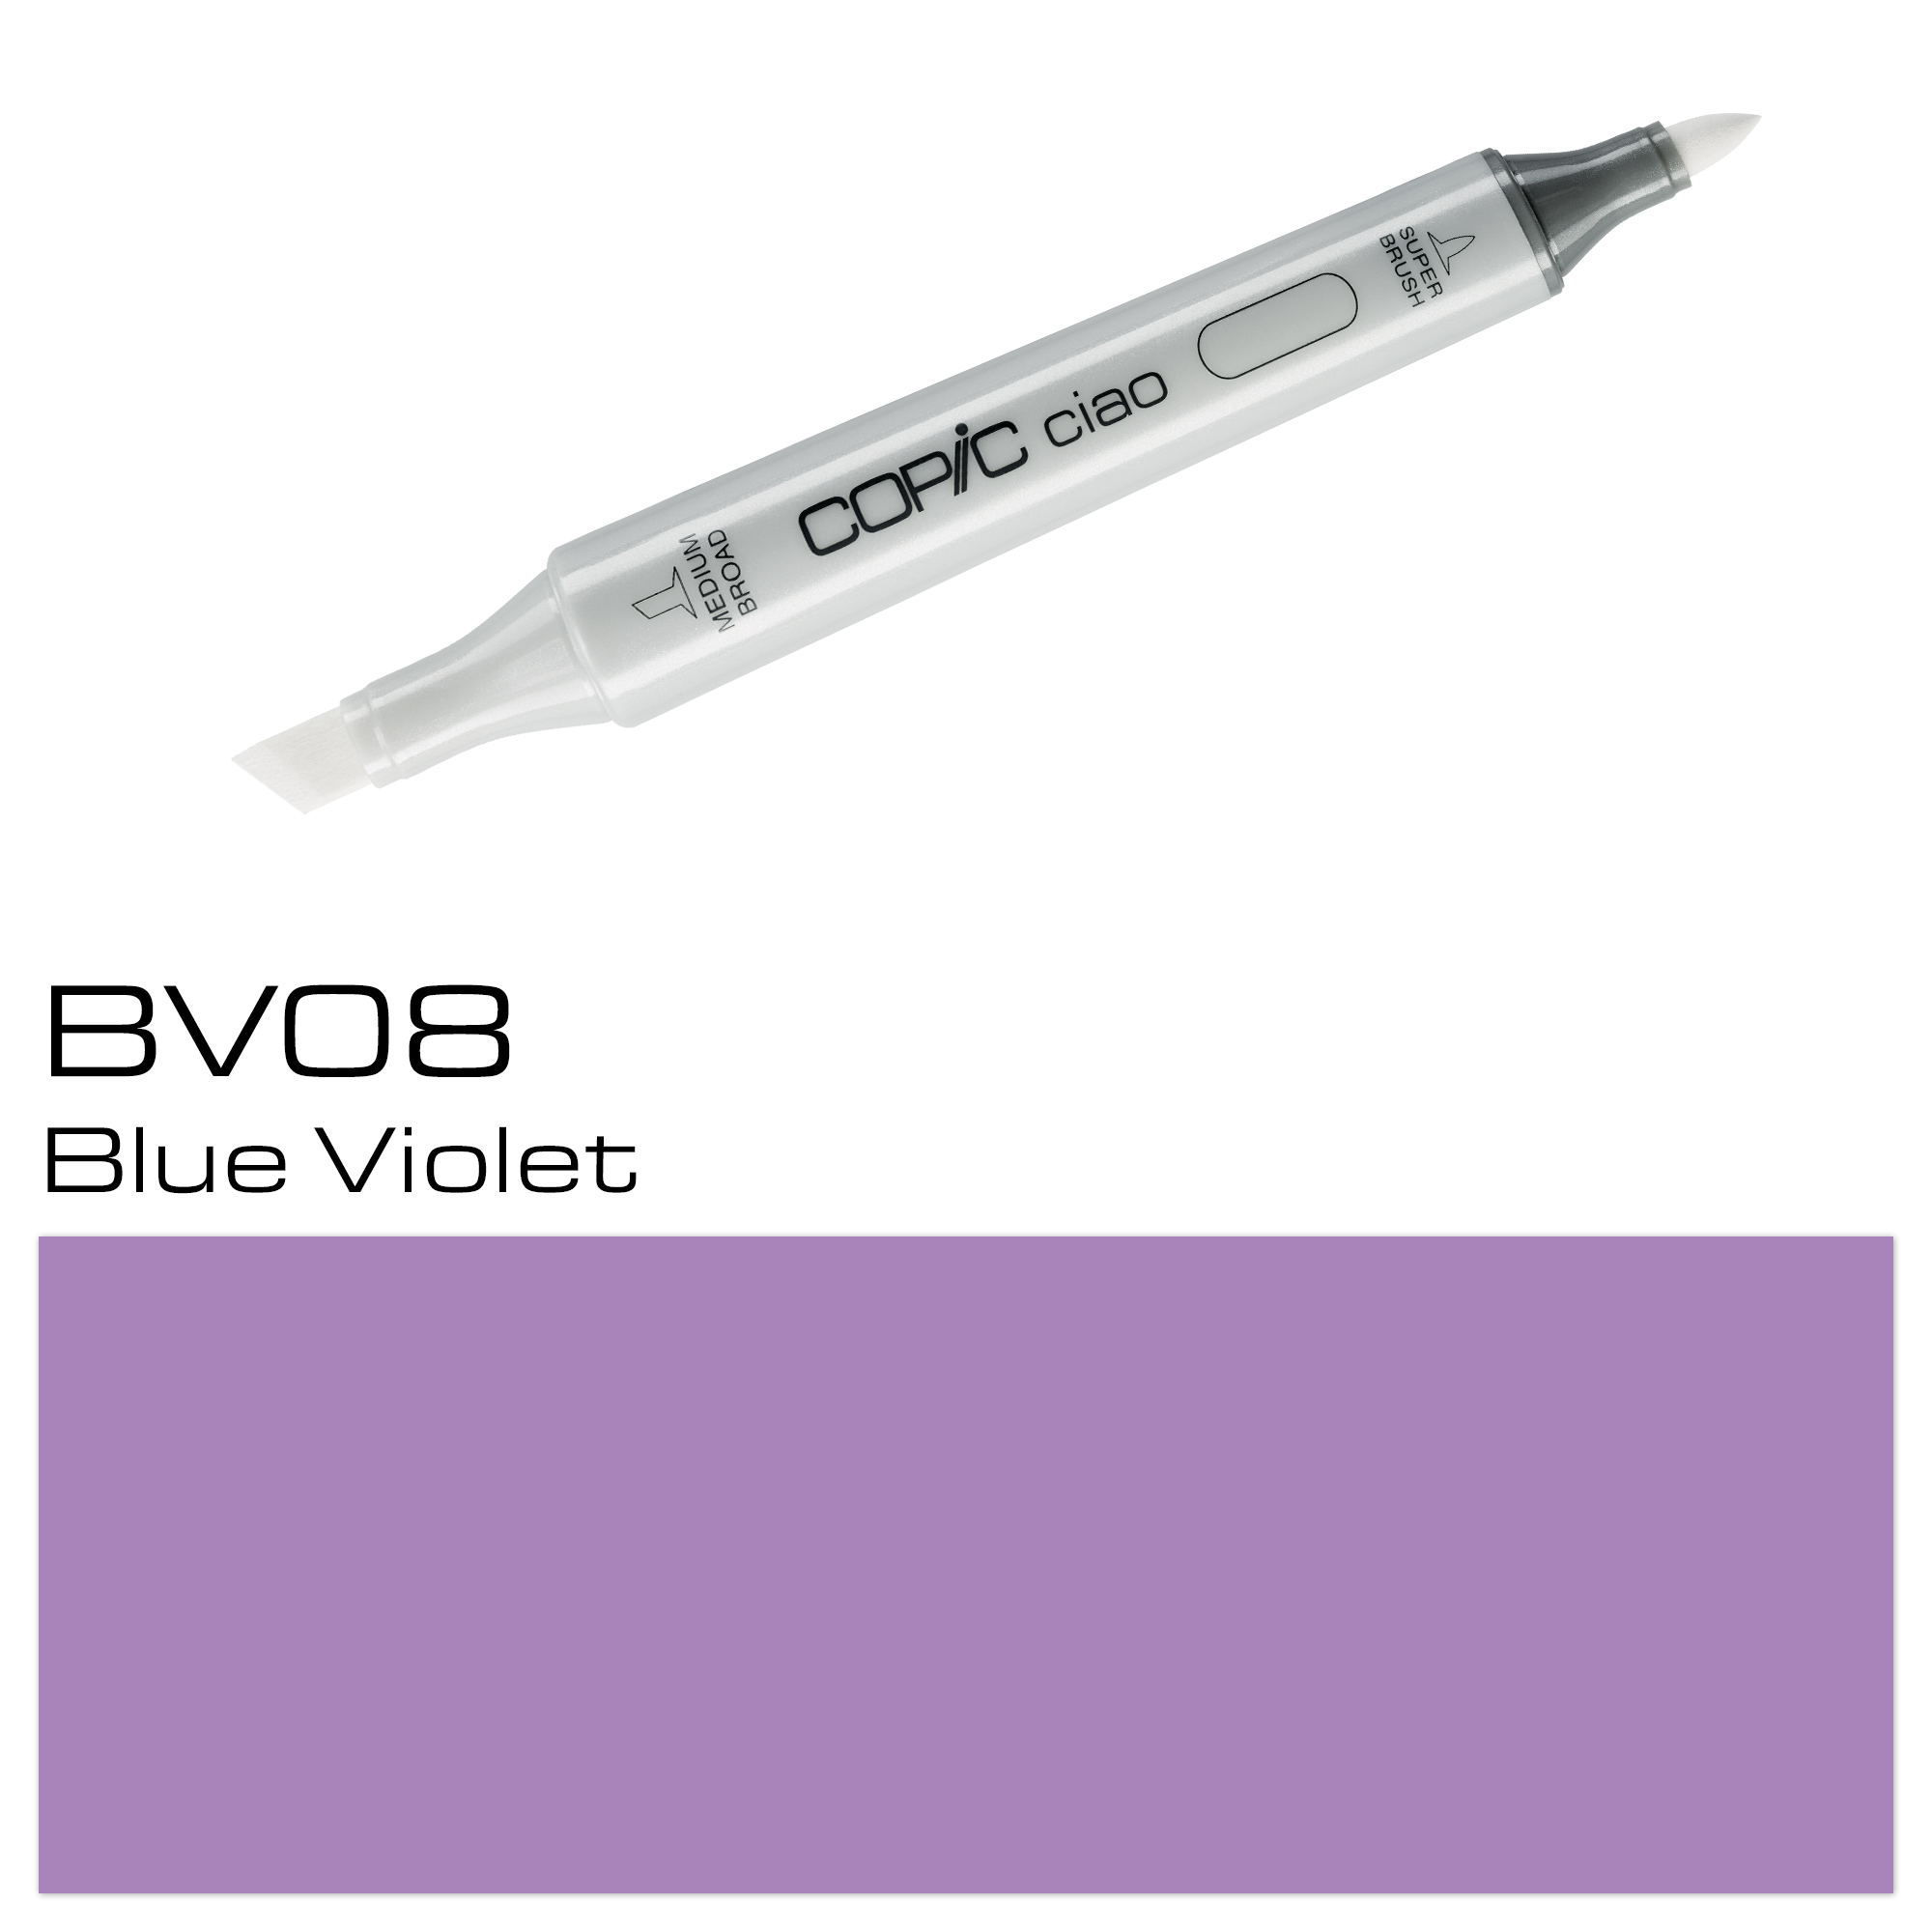 COPIC CIAO BLUE VIOLET BV08